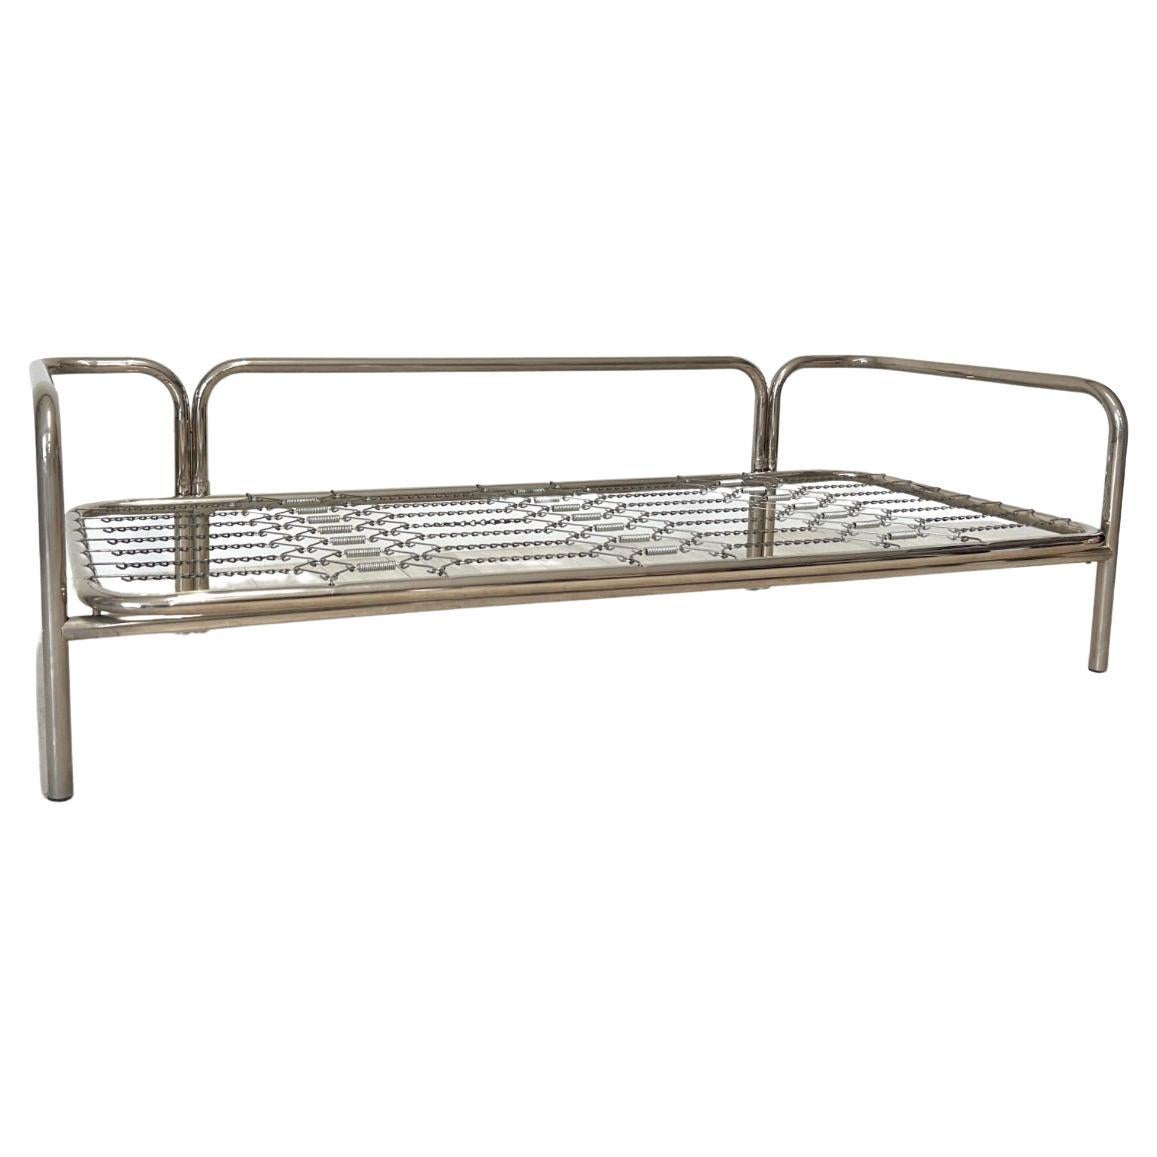 Gae Aulenti for Poltronova 'Locus Solus' day bed in chromed steel For Sale